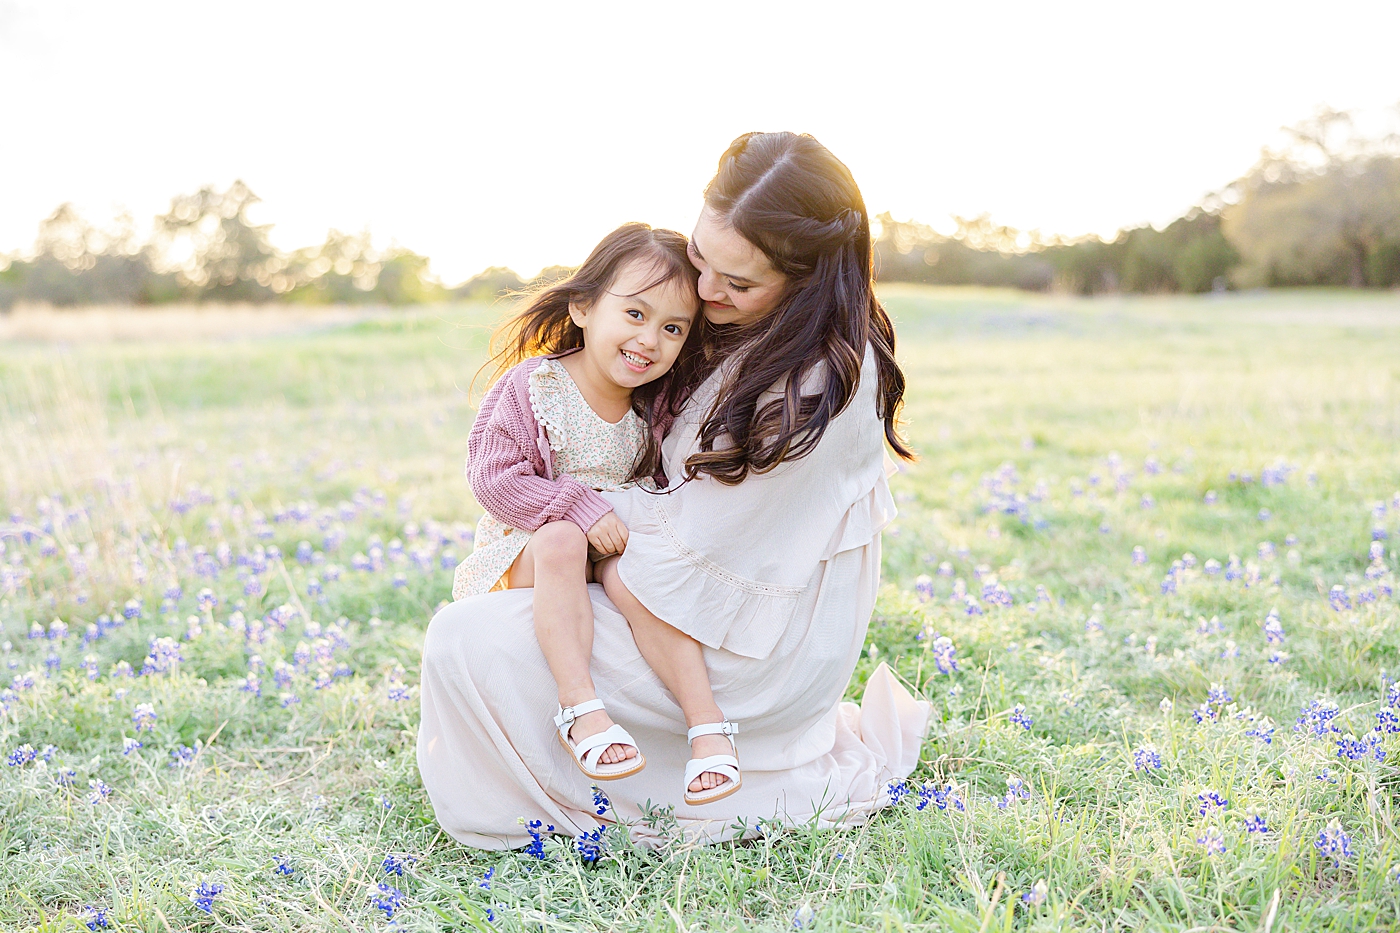 during their Milestone Session with Texas Bluebonnets | Image by Sana Ahmed